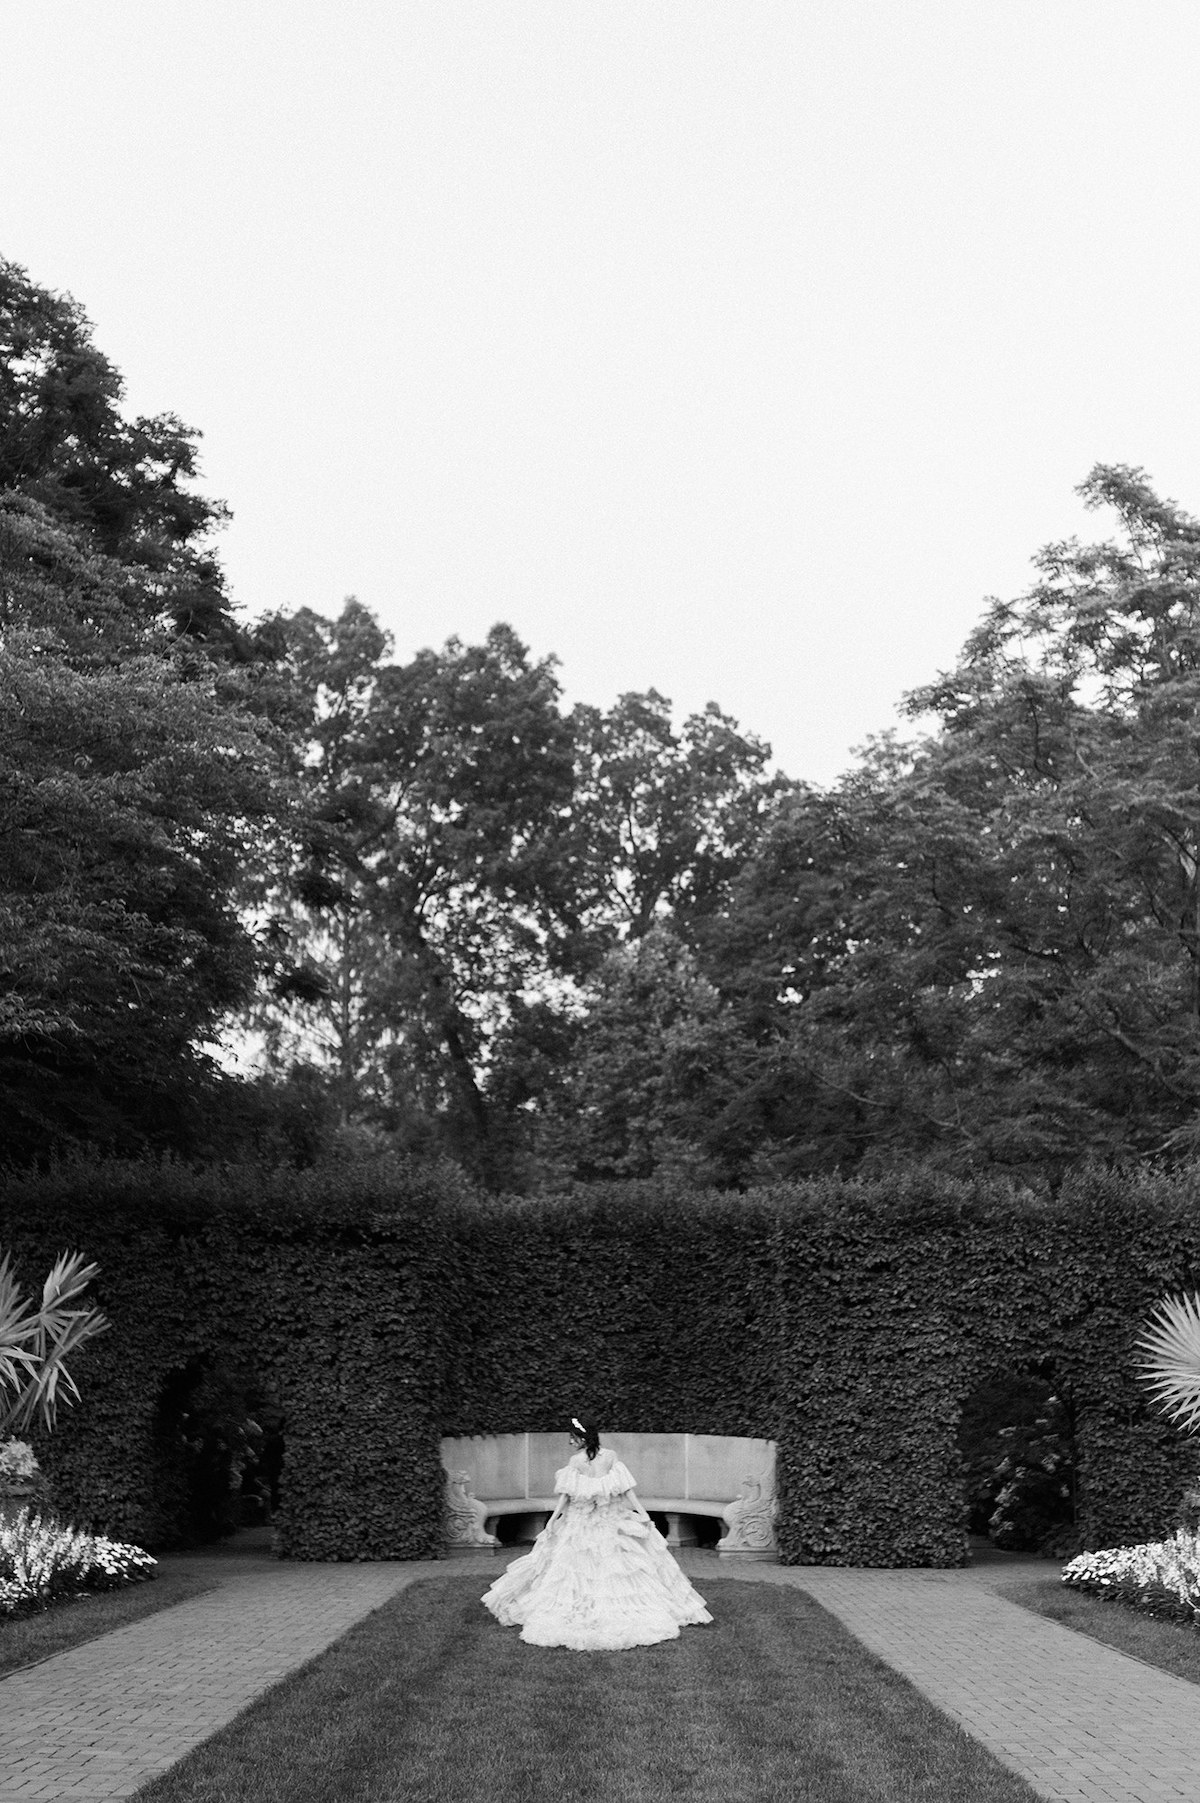 A captivating black and white image capturing the bride's grace and elegance as she dons the tiered couture gown against the backdrop of Longwood Gardens.